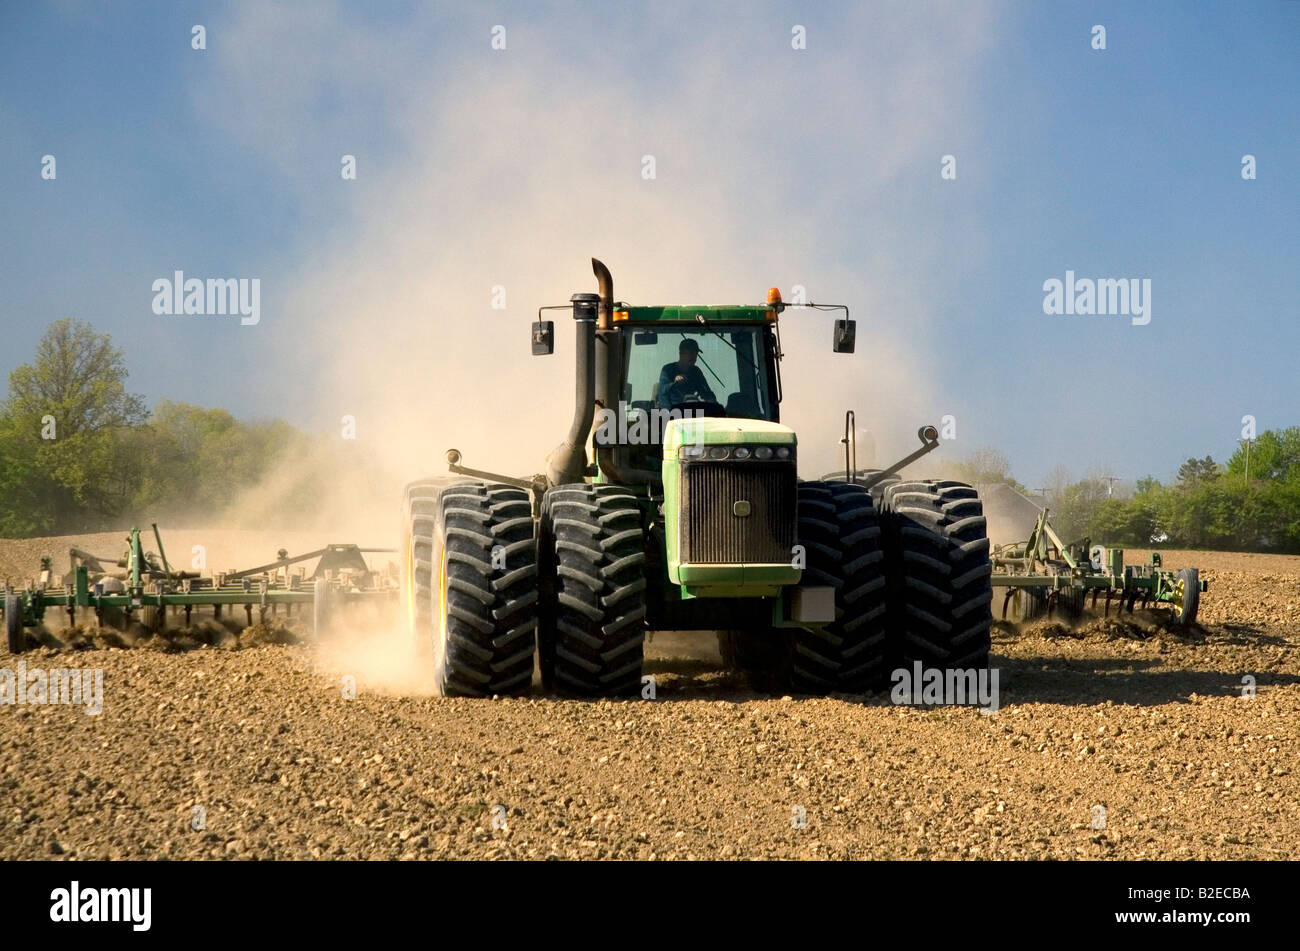 Large tractor cultivating spring soil in Lapeer County Michigan Stock Photo